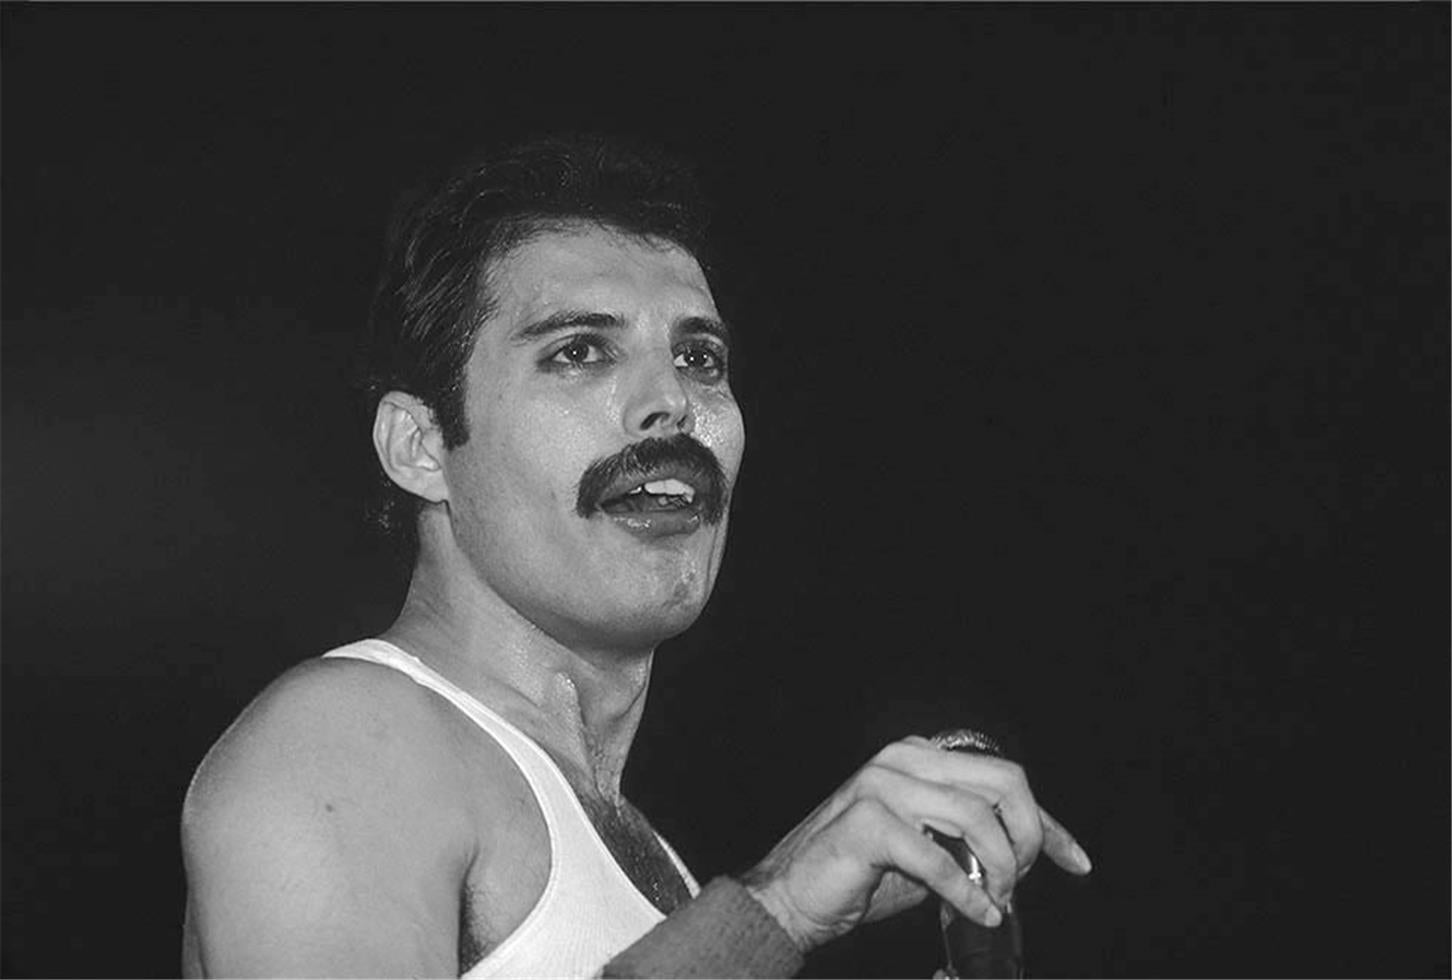  Charlyn Zlotnik Black and White Photograph - Freddie Mercury, Queen, NYC, 1980